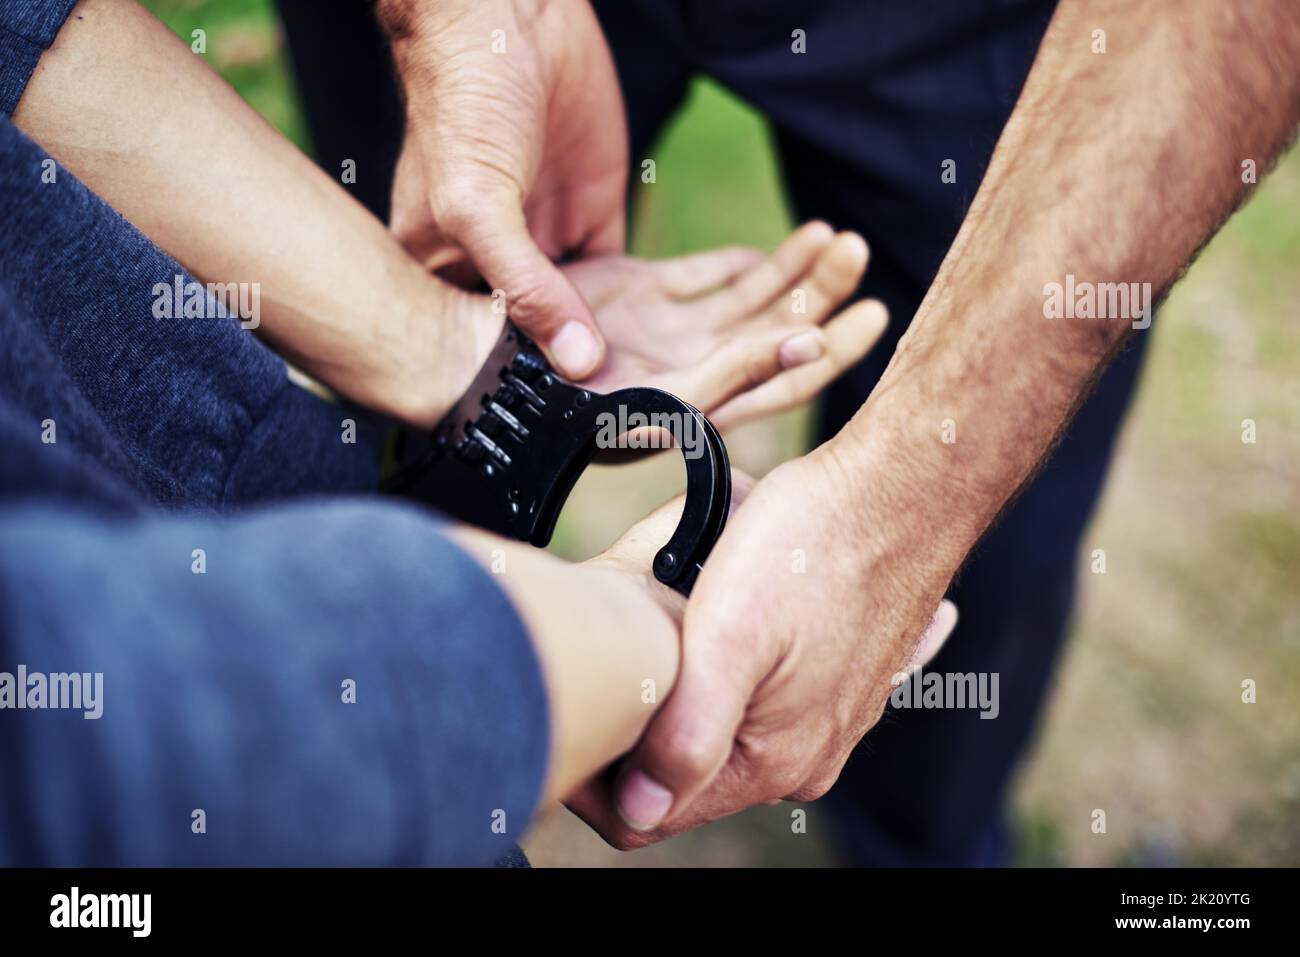 Keeping crime off the streets. a policemans hands putting cuffs on a suspect. Stock Photo